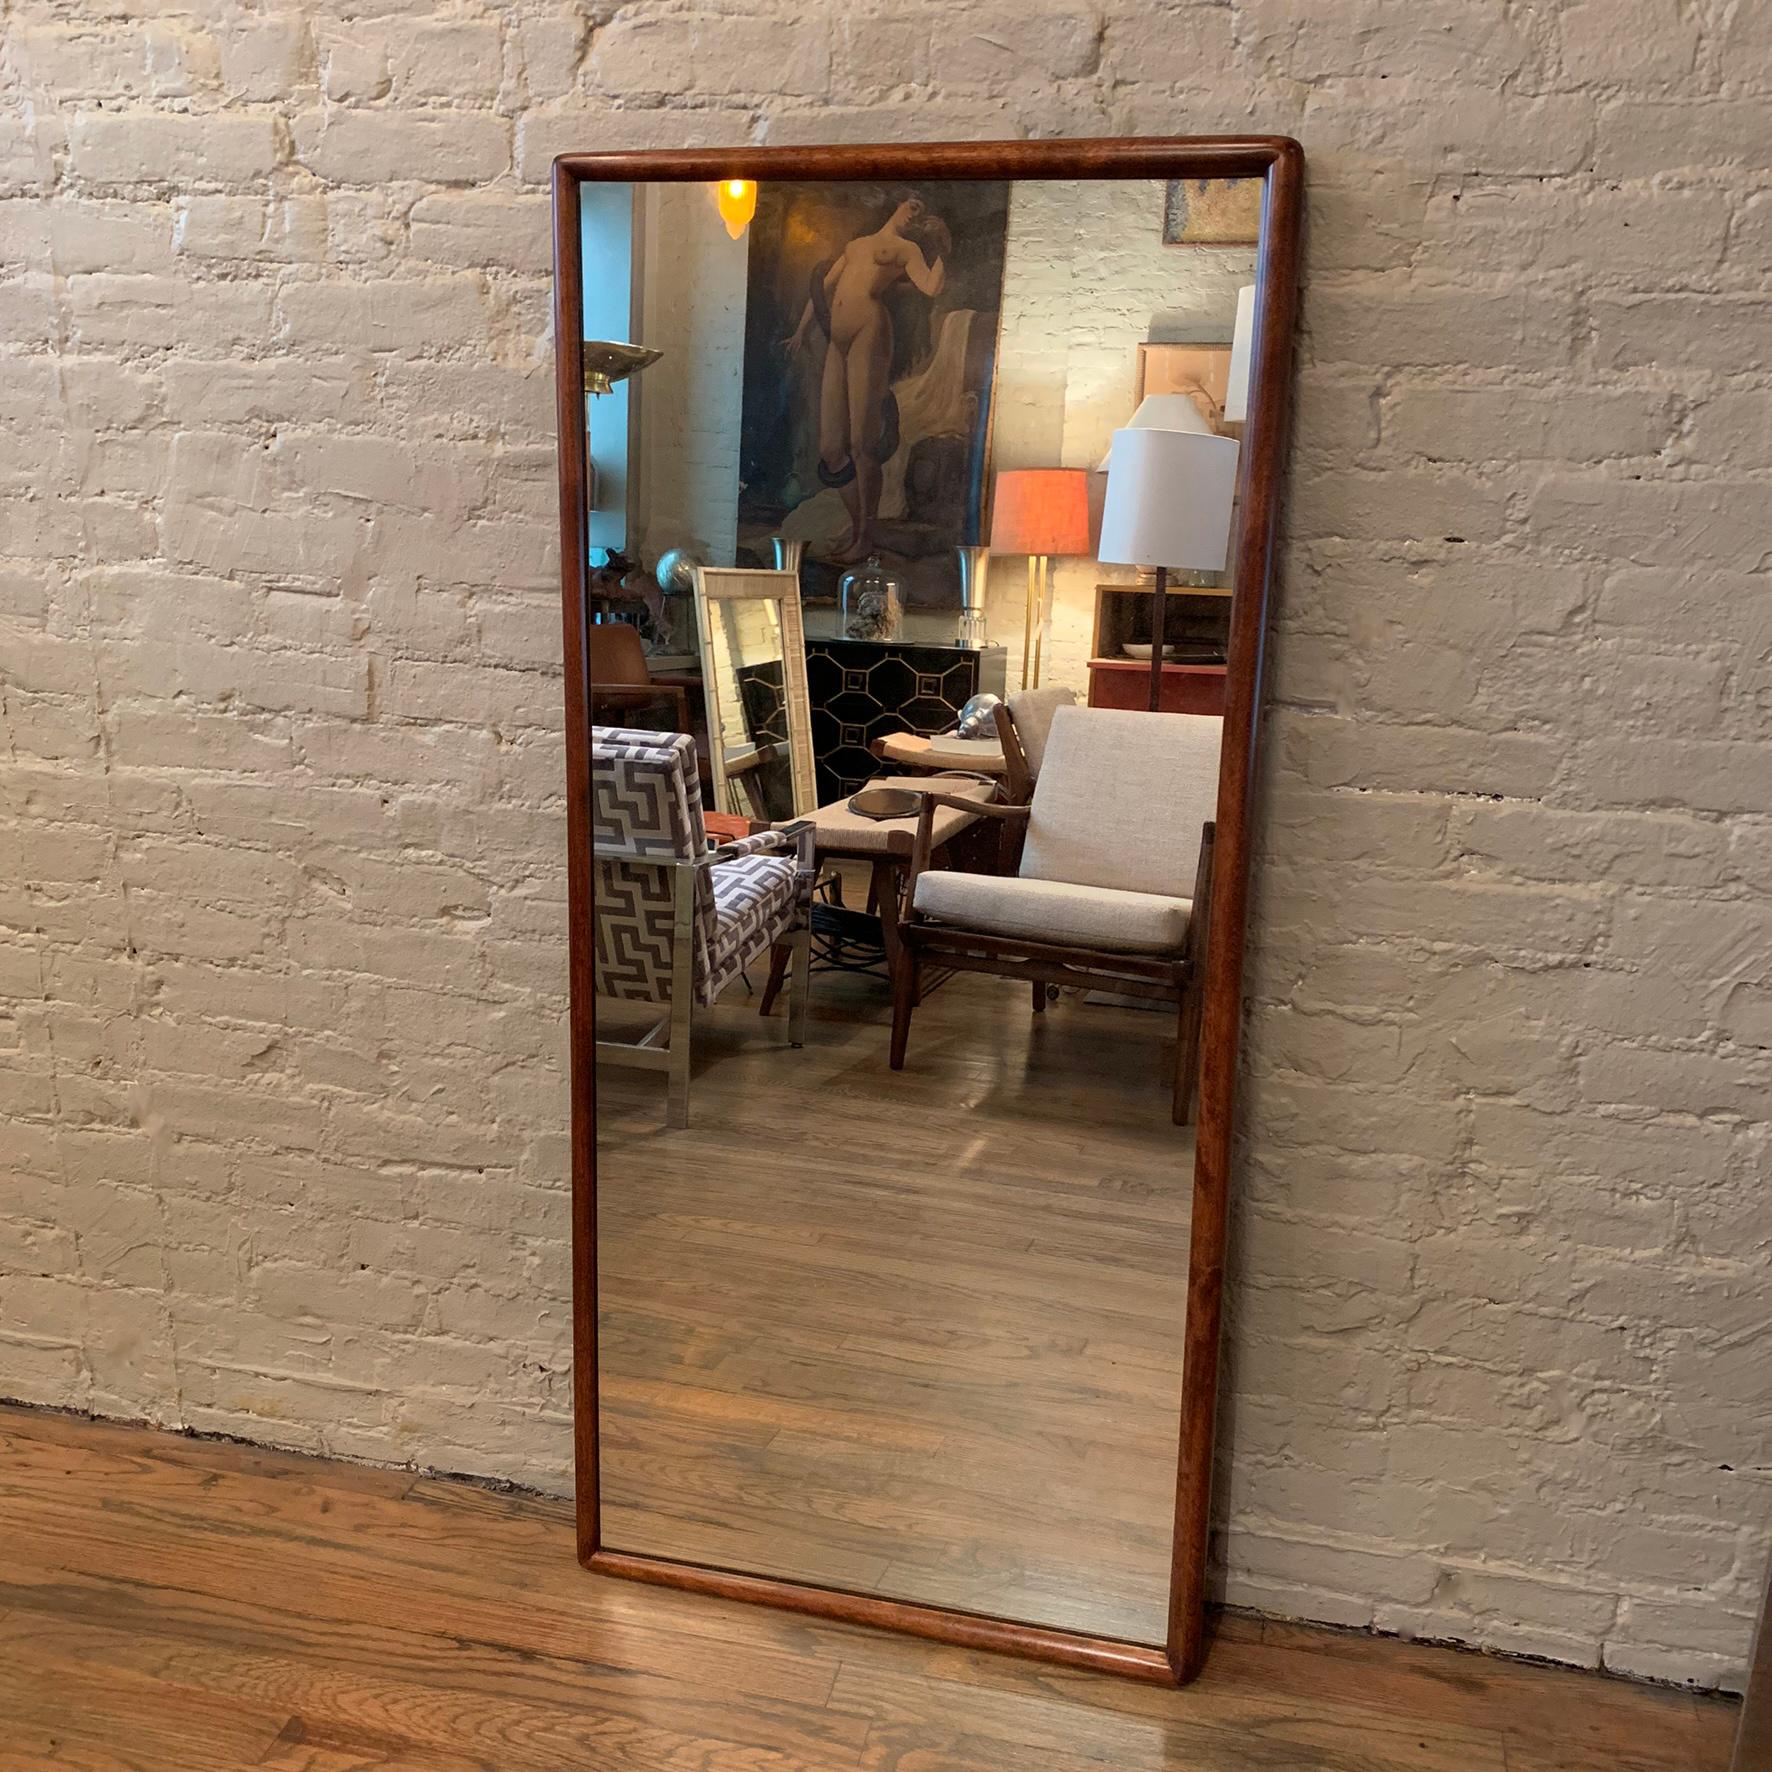 Slender, rectangular, wall mirror attributed to T.H. Robsjohn-Gibbings for Widdicomb features a simple and elegant bullnose maple frame.